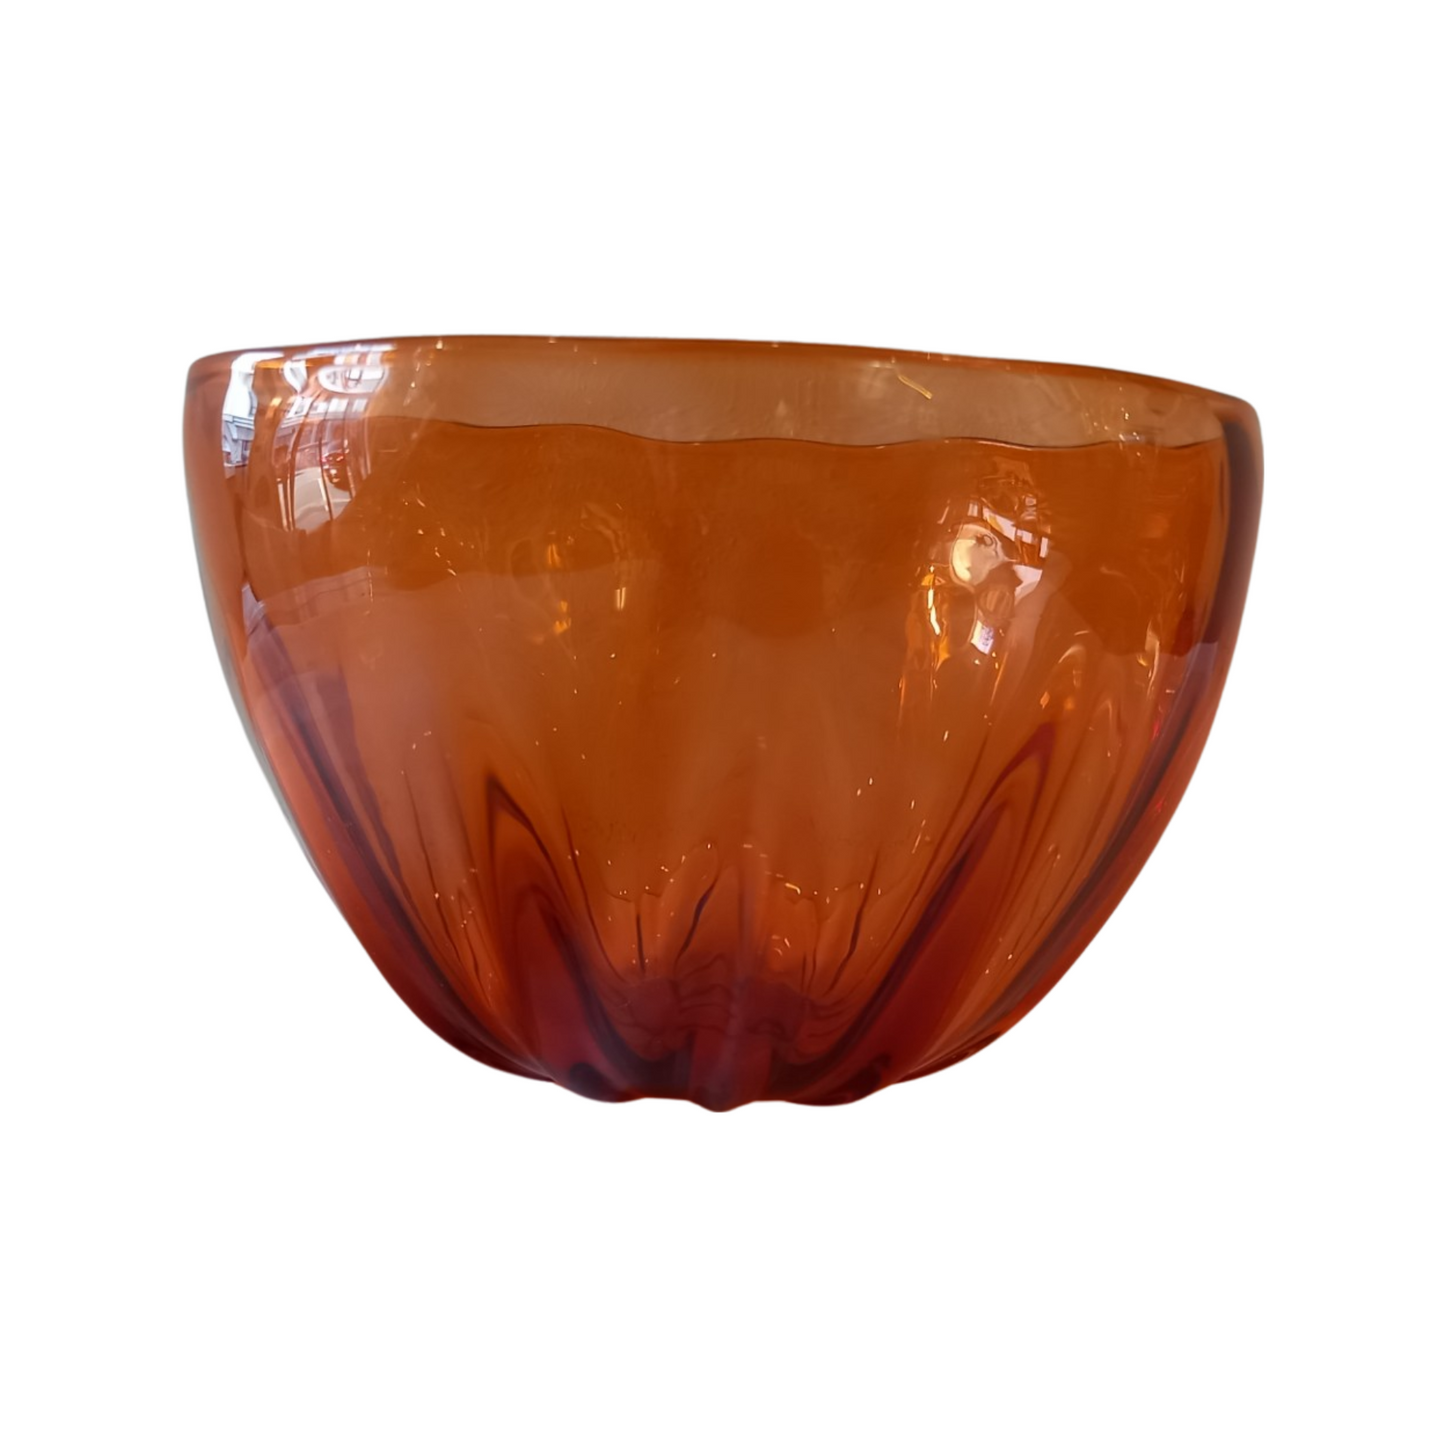 Amber fluted glass bowl